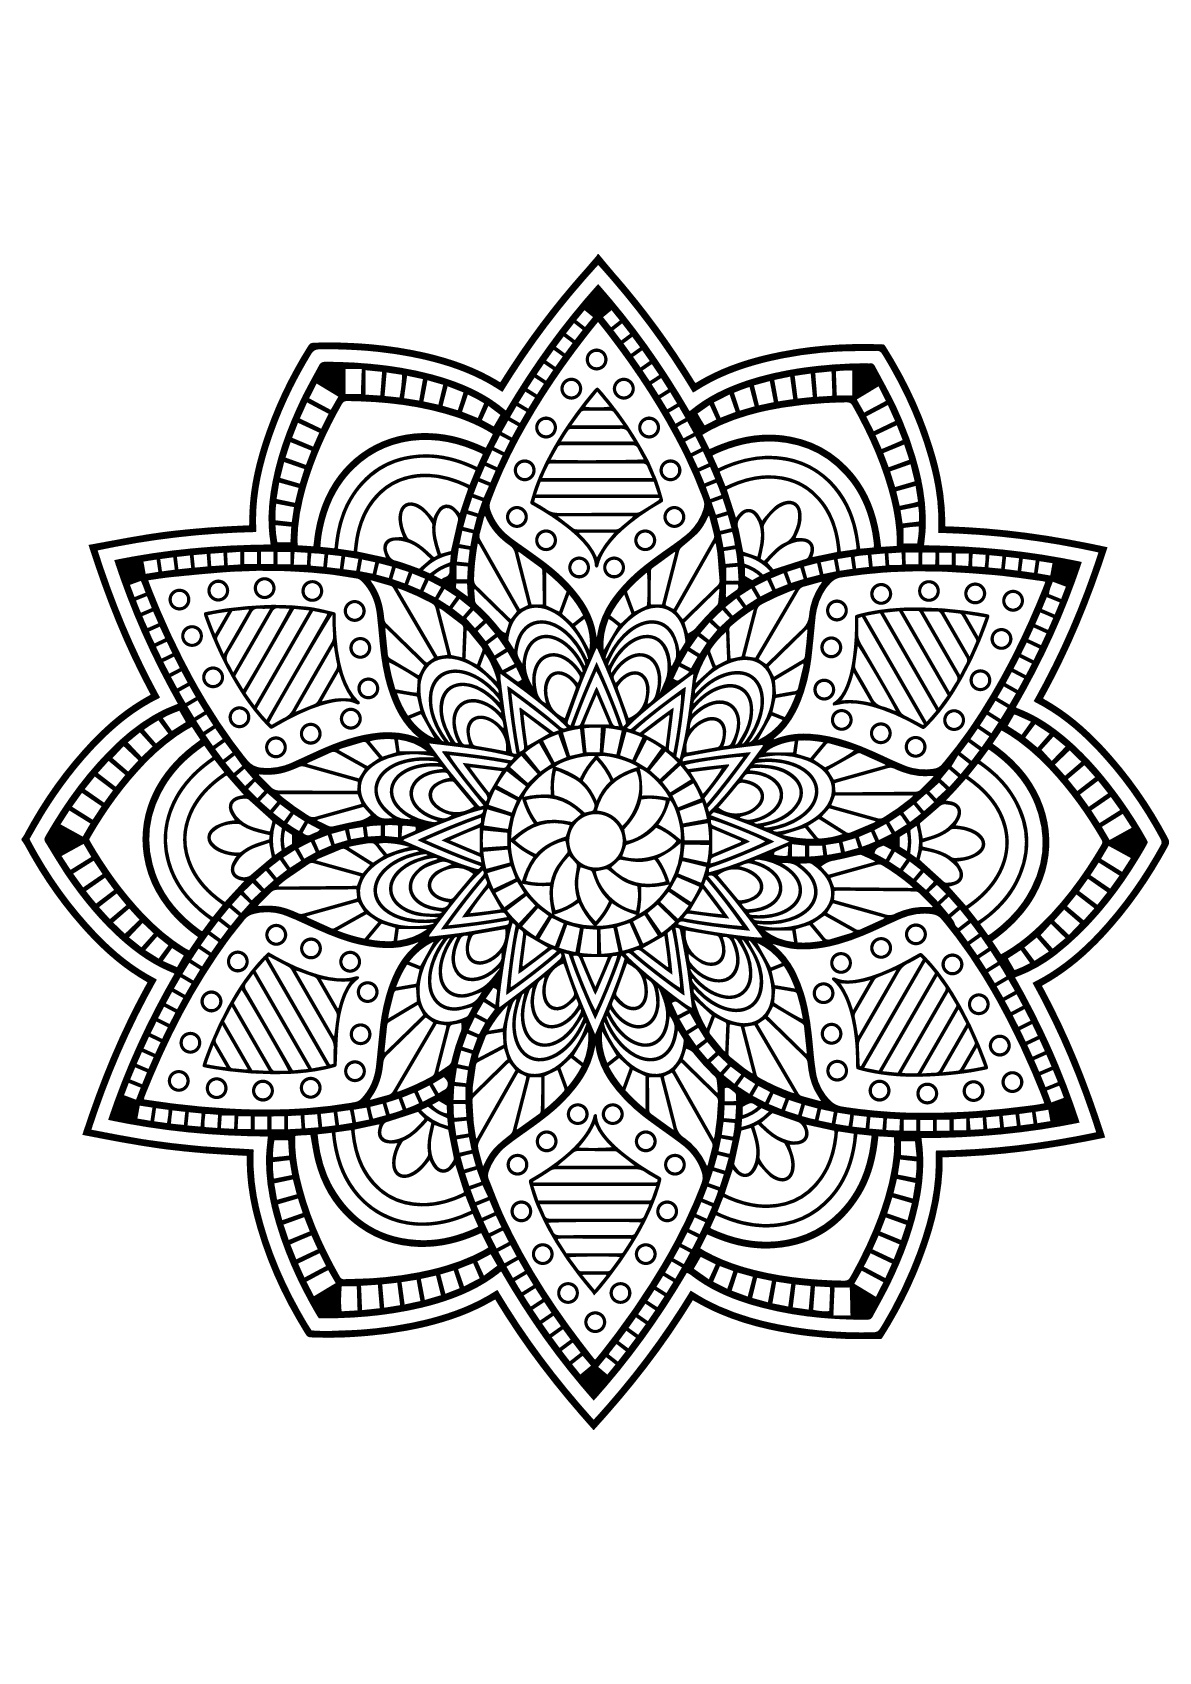 Mandala from free coloring books for adults 24 Malas